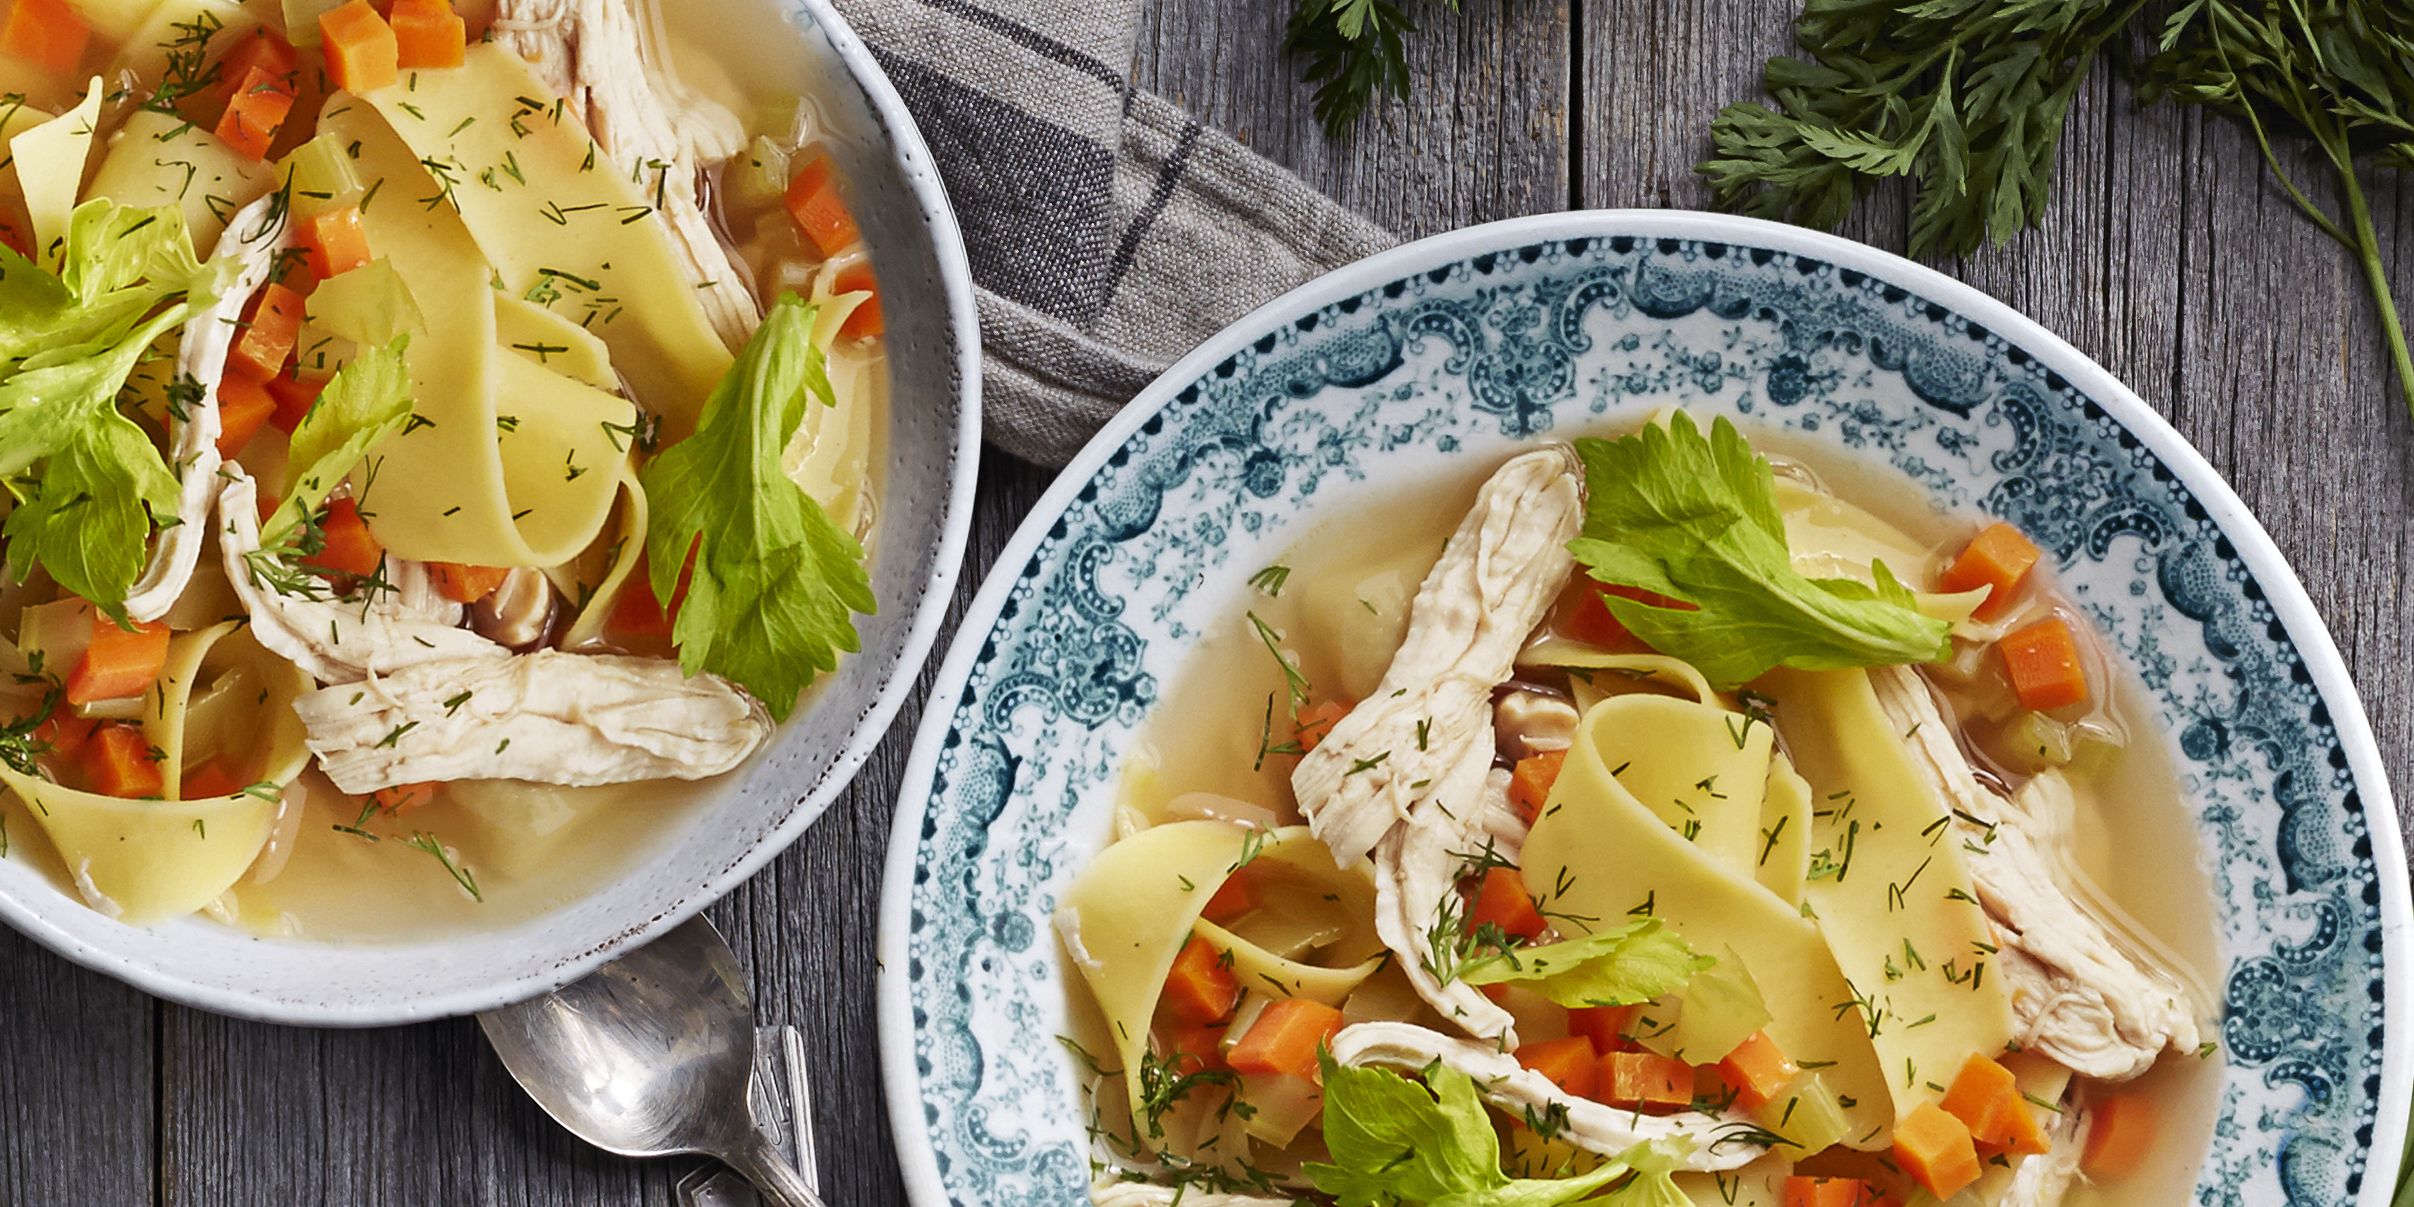 10 tips for making soup in your Instant Pot - Make the Best of Everything